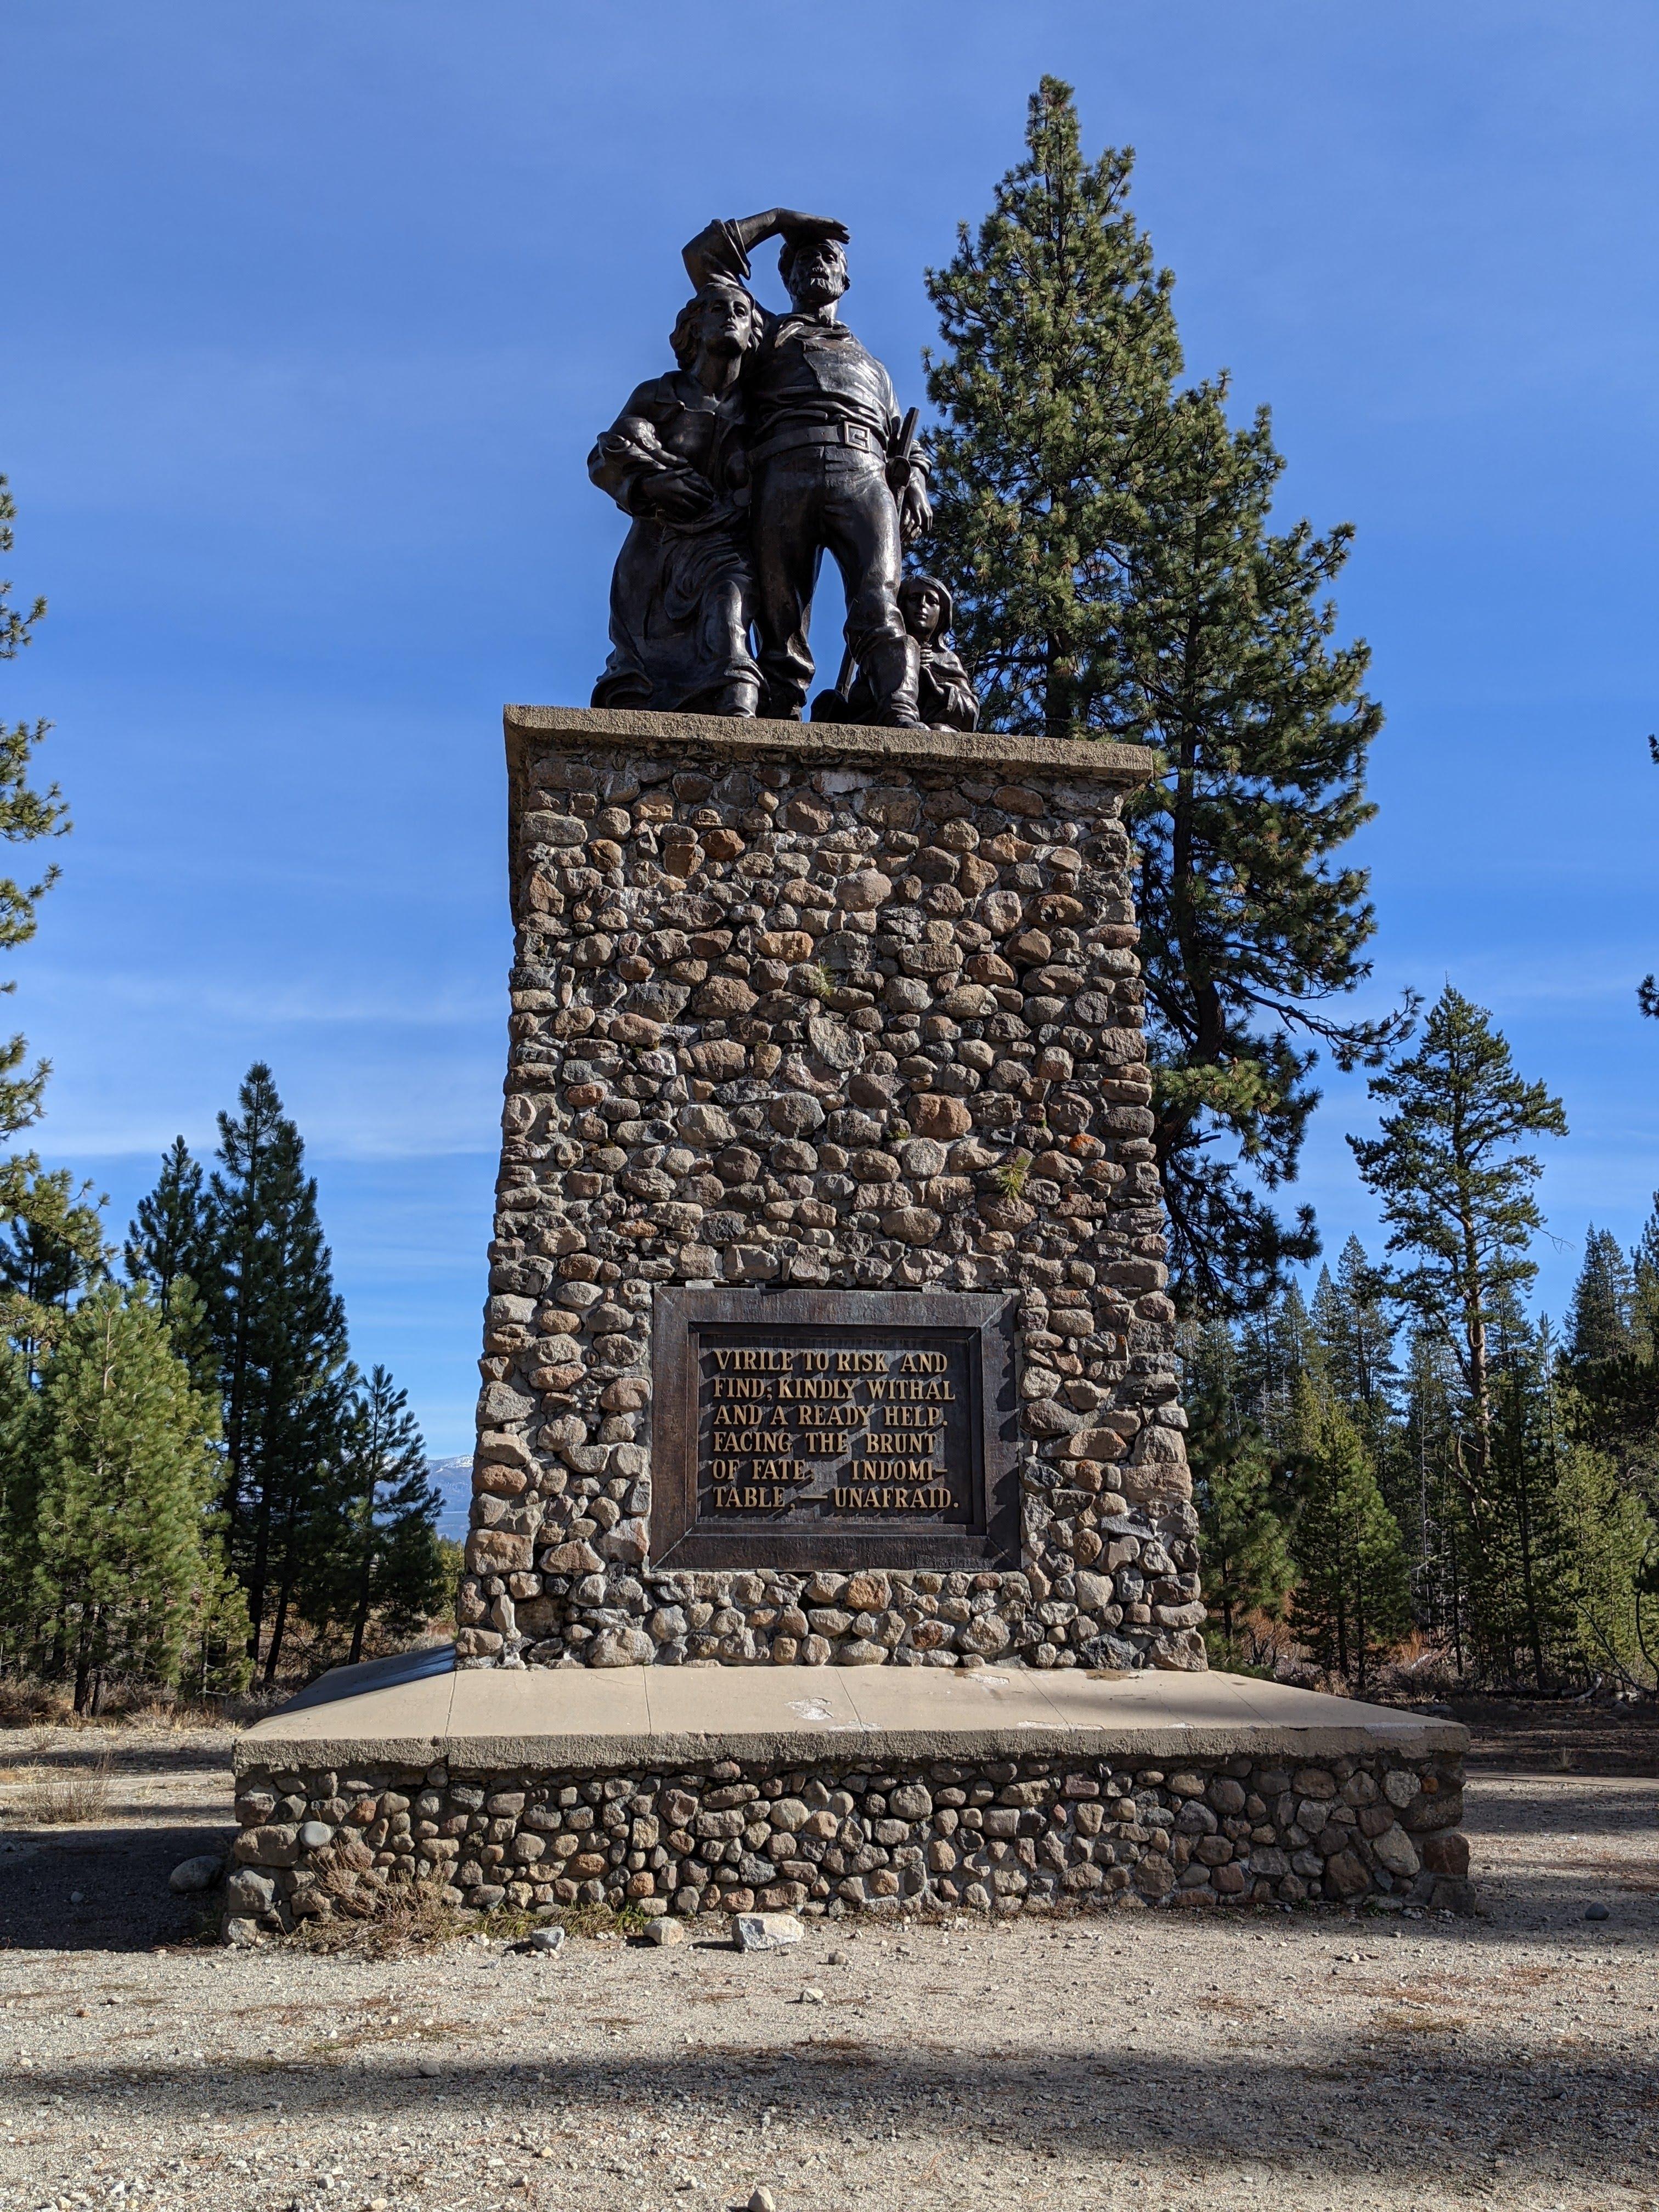 Monument near the Schallenberger-Breen cabin site, opened in 1918